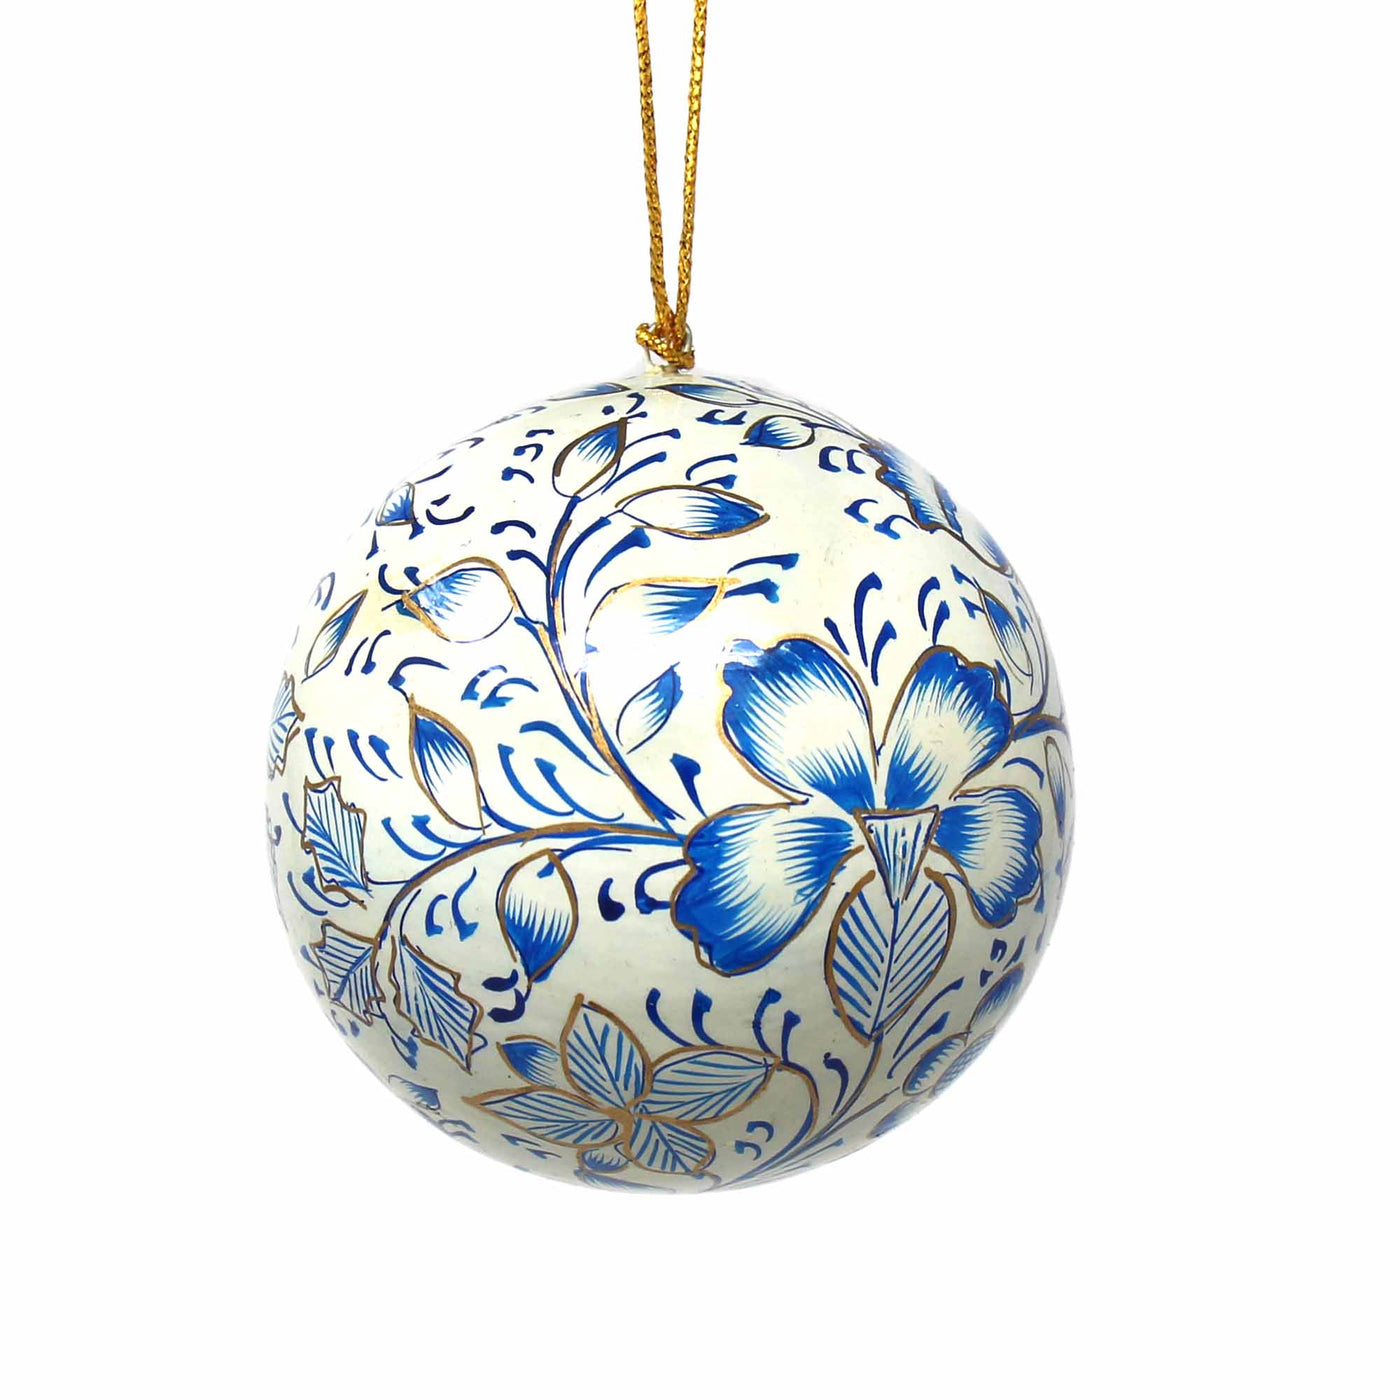 Handpainted Ornaments, Blue Floral - Pack of 3 - Yvonne’s 100th Wish Inc